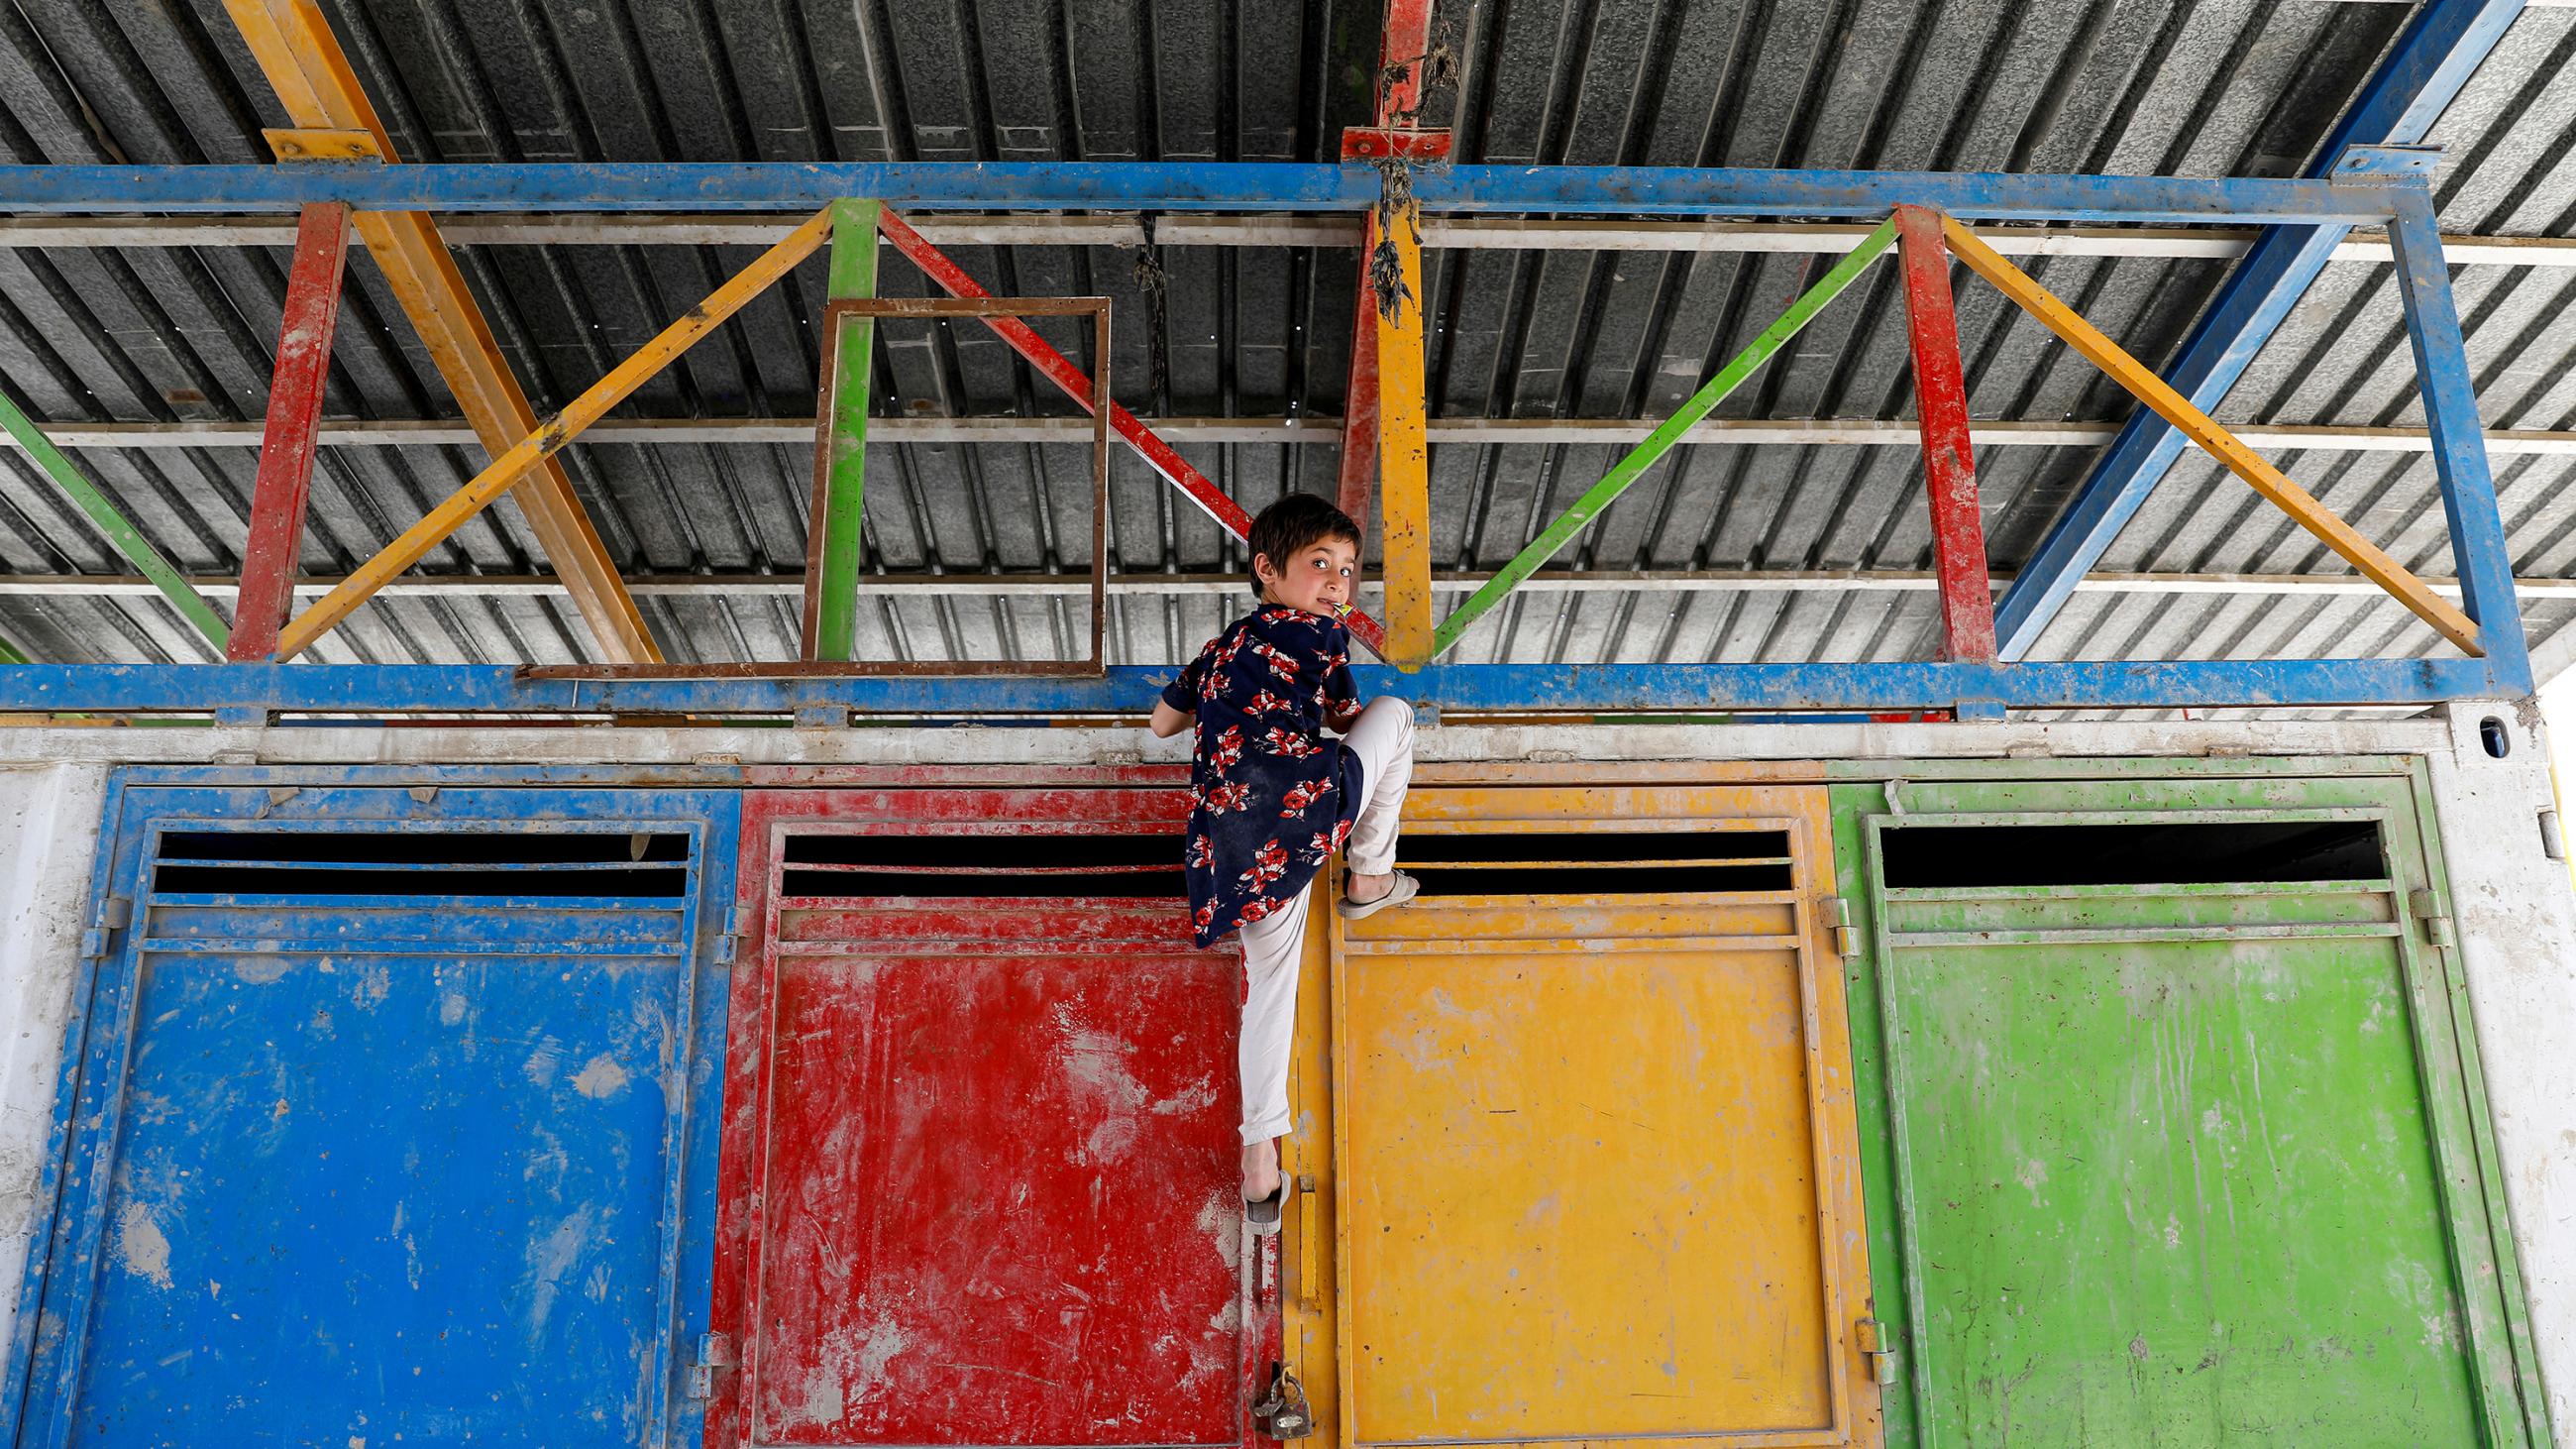 The picture shows a small girl climbing up a brightly colored metal container. 